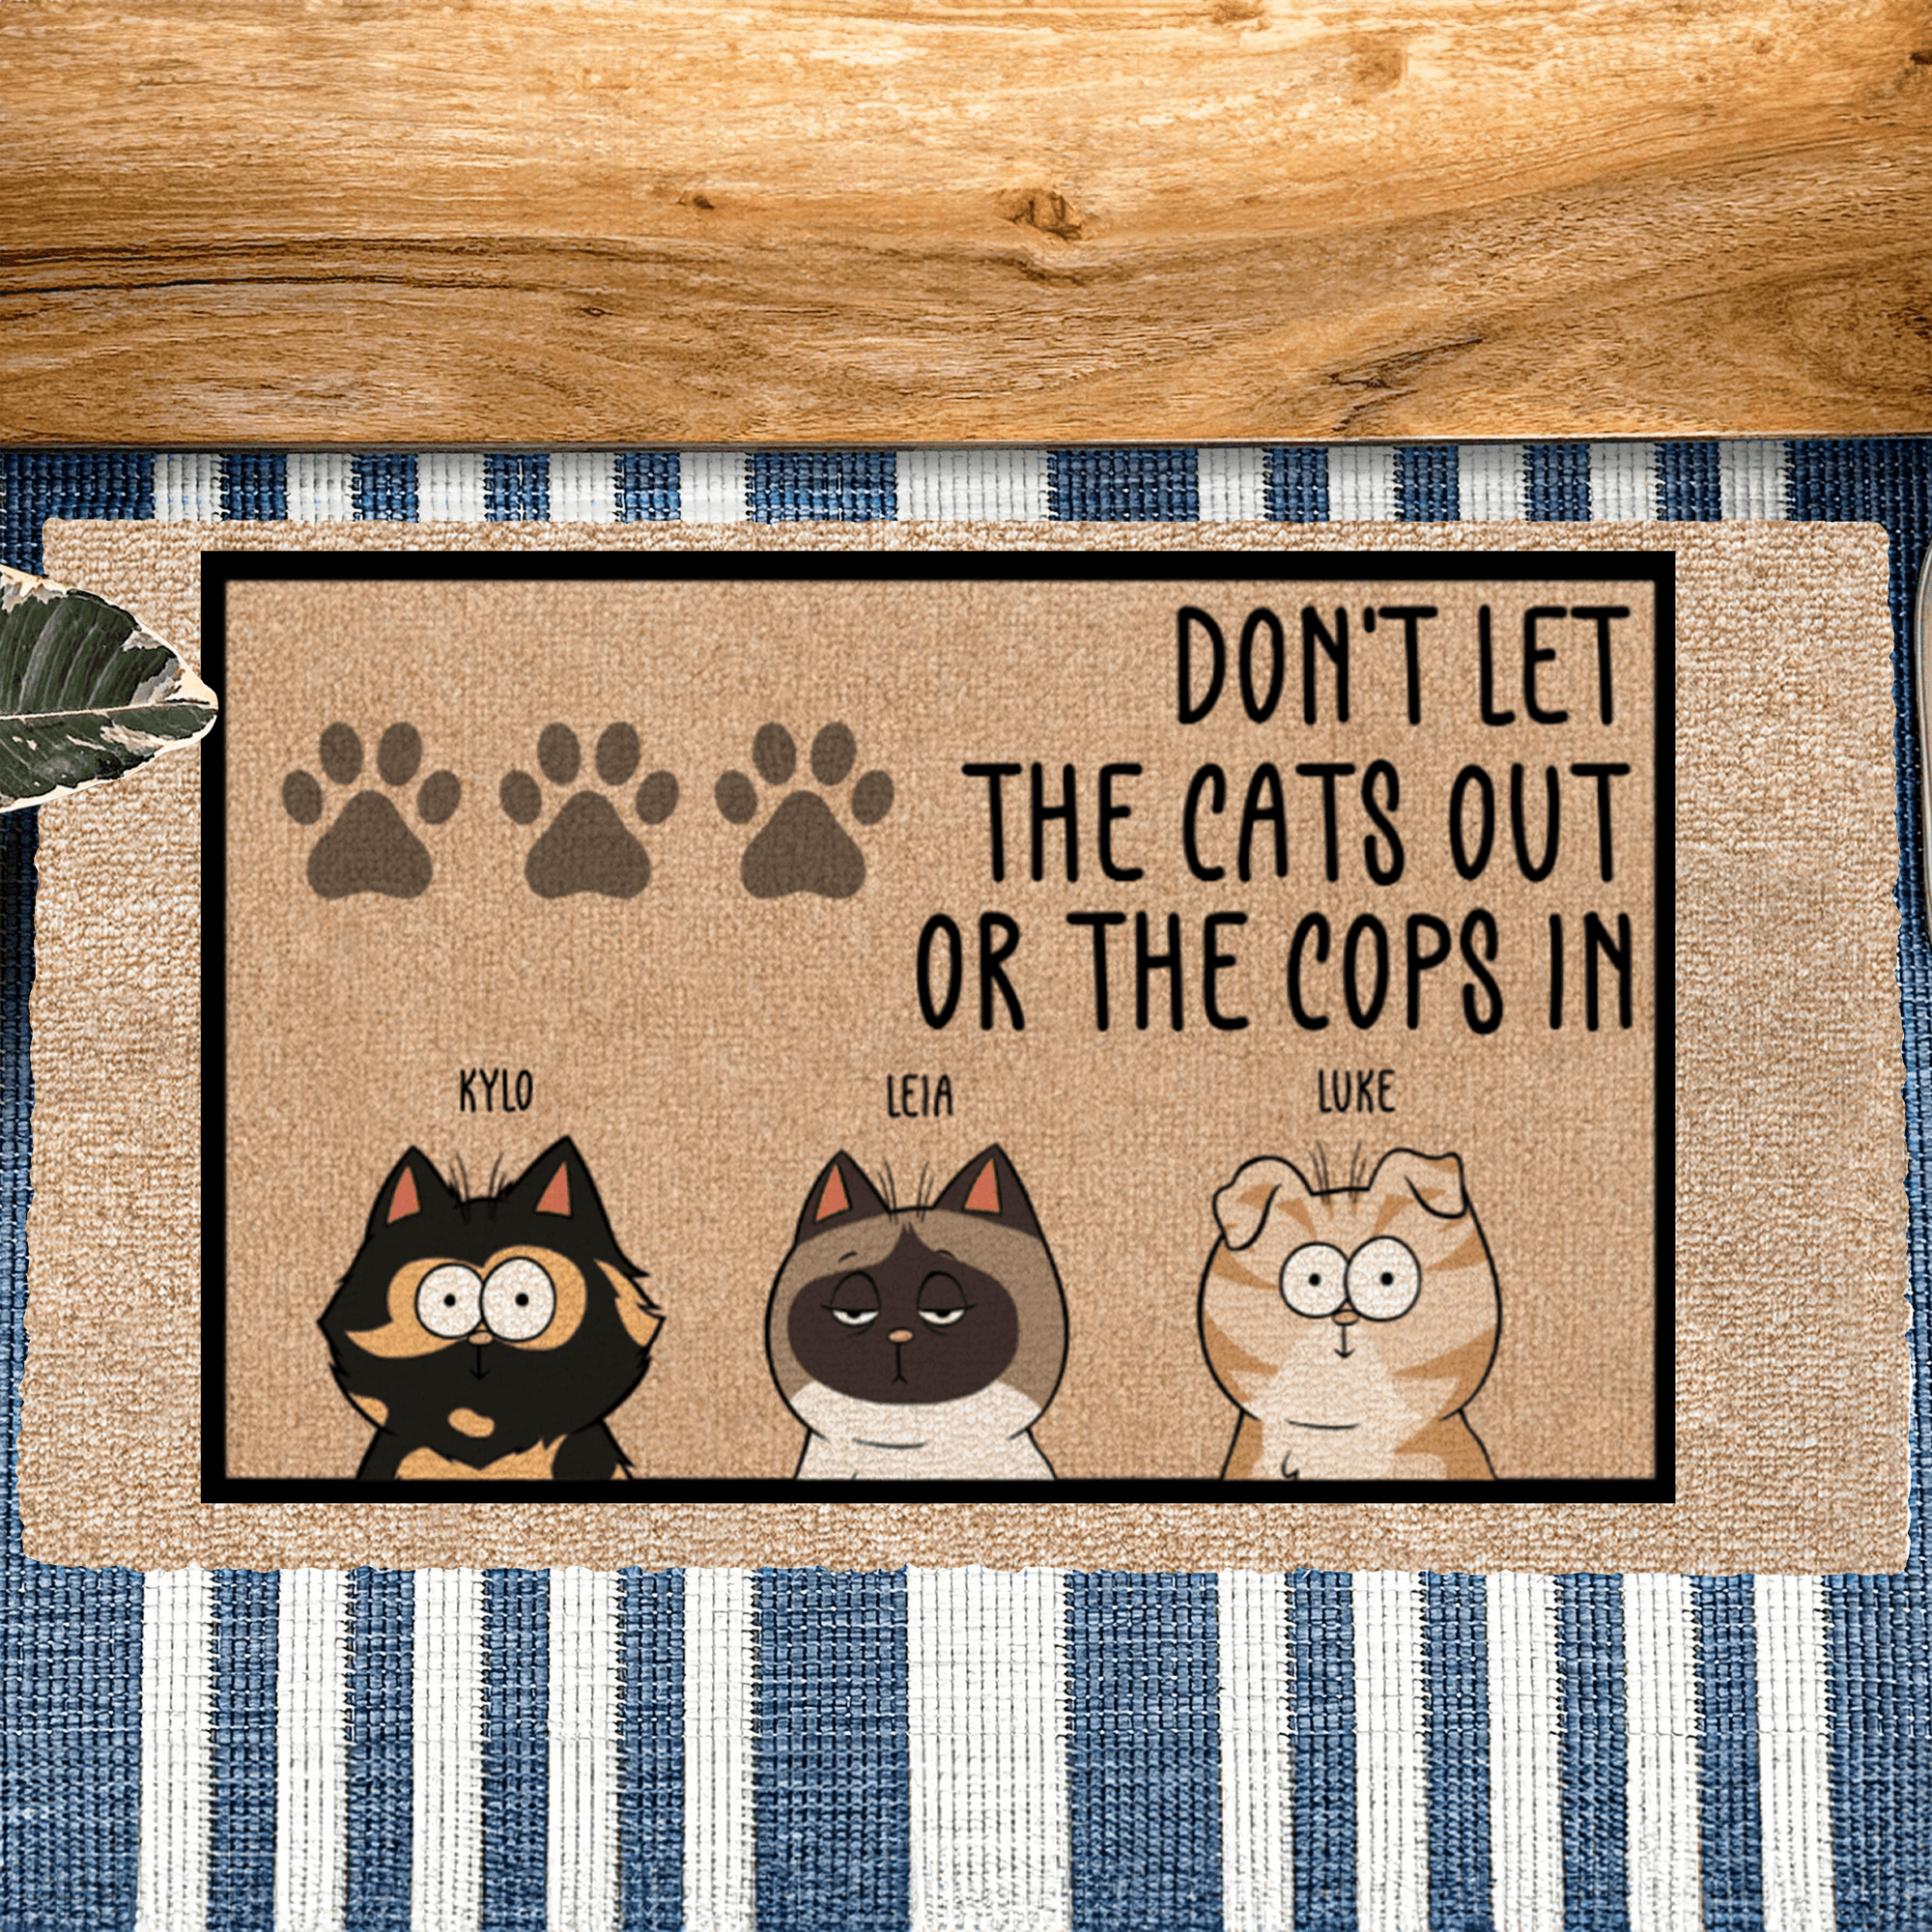 Don't Let The Cats Out Or The Cops In - Personalized Doormat - Birthday, Housewarming, Funny Gift for Homeowners, Friends, Cat Mom, Cat Dad, Cat Lovers, Pet Gifts for Him, Her - Suzitee Store